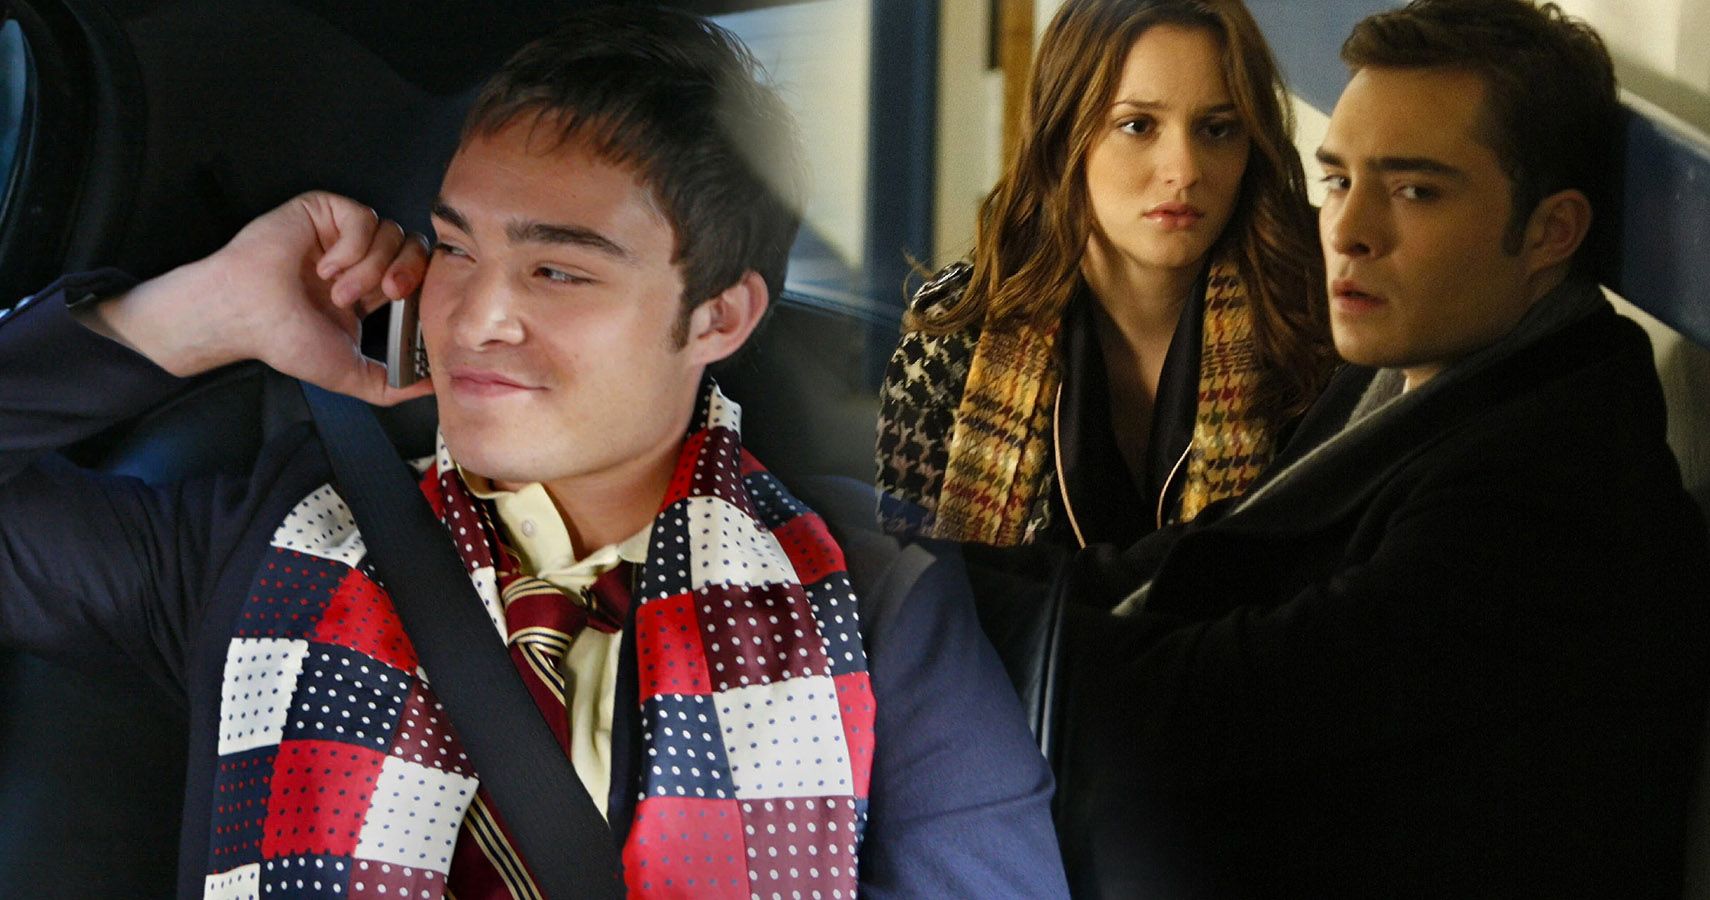 Gossip Girl: 5 Times We Felt Bad For Chuck (& 5 We Hated Him)